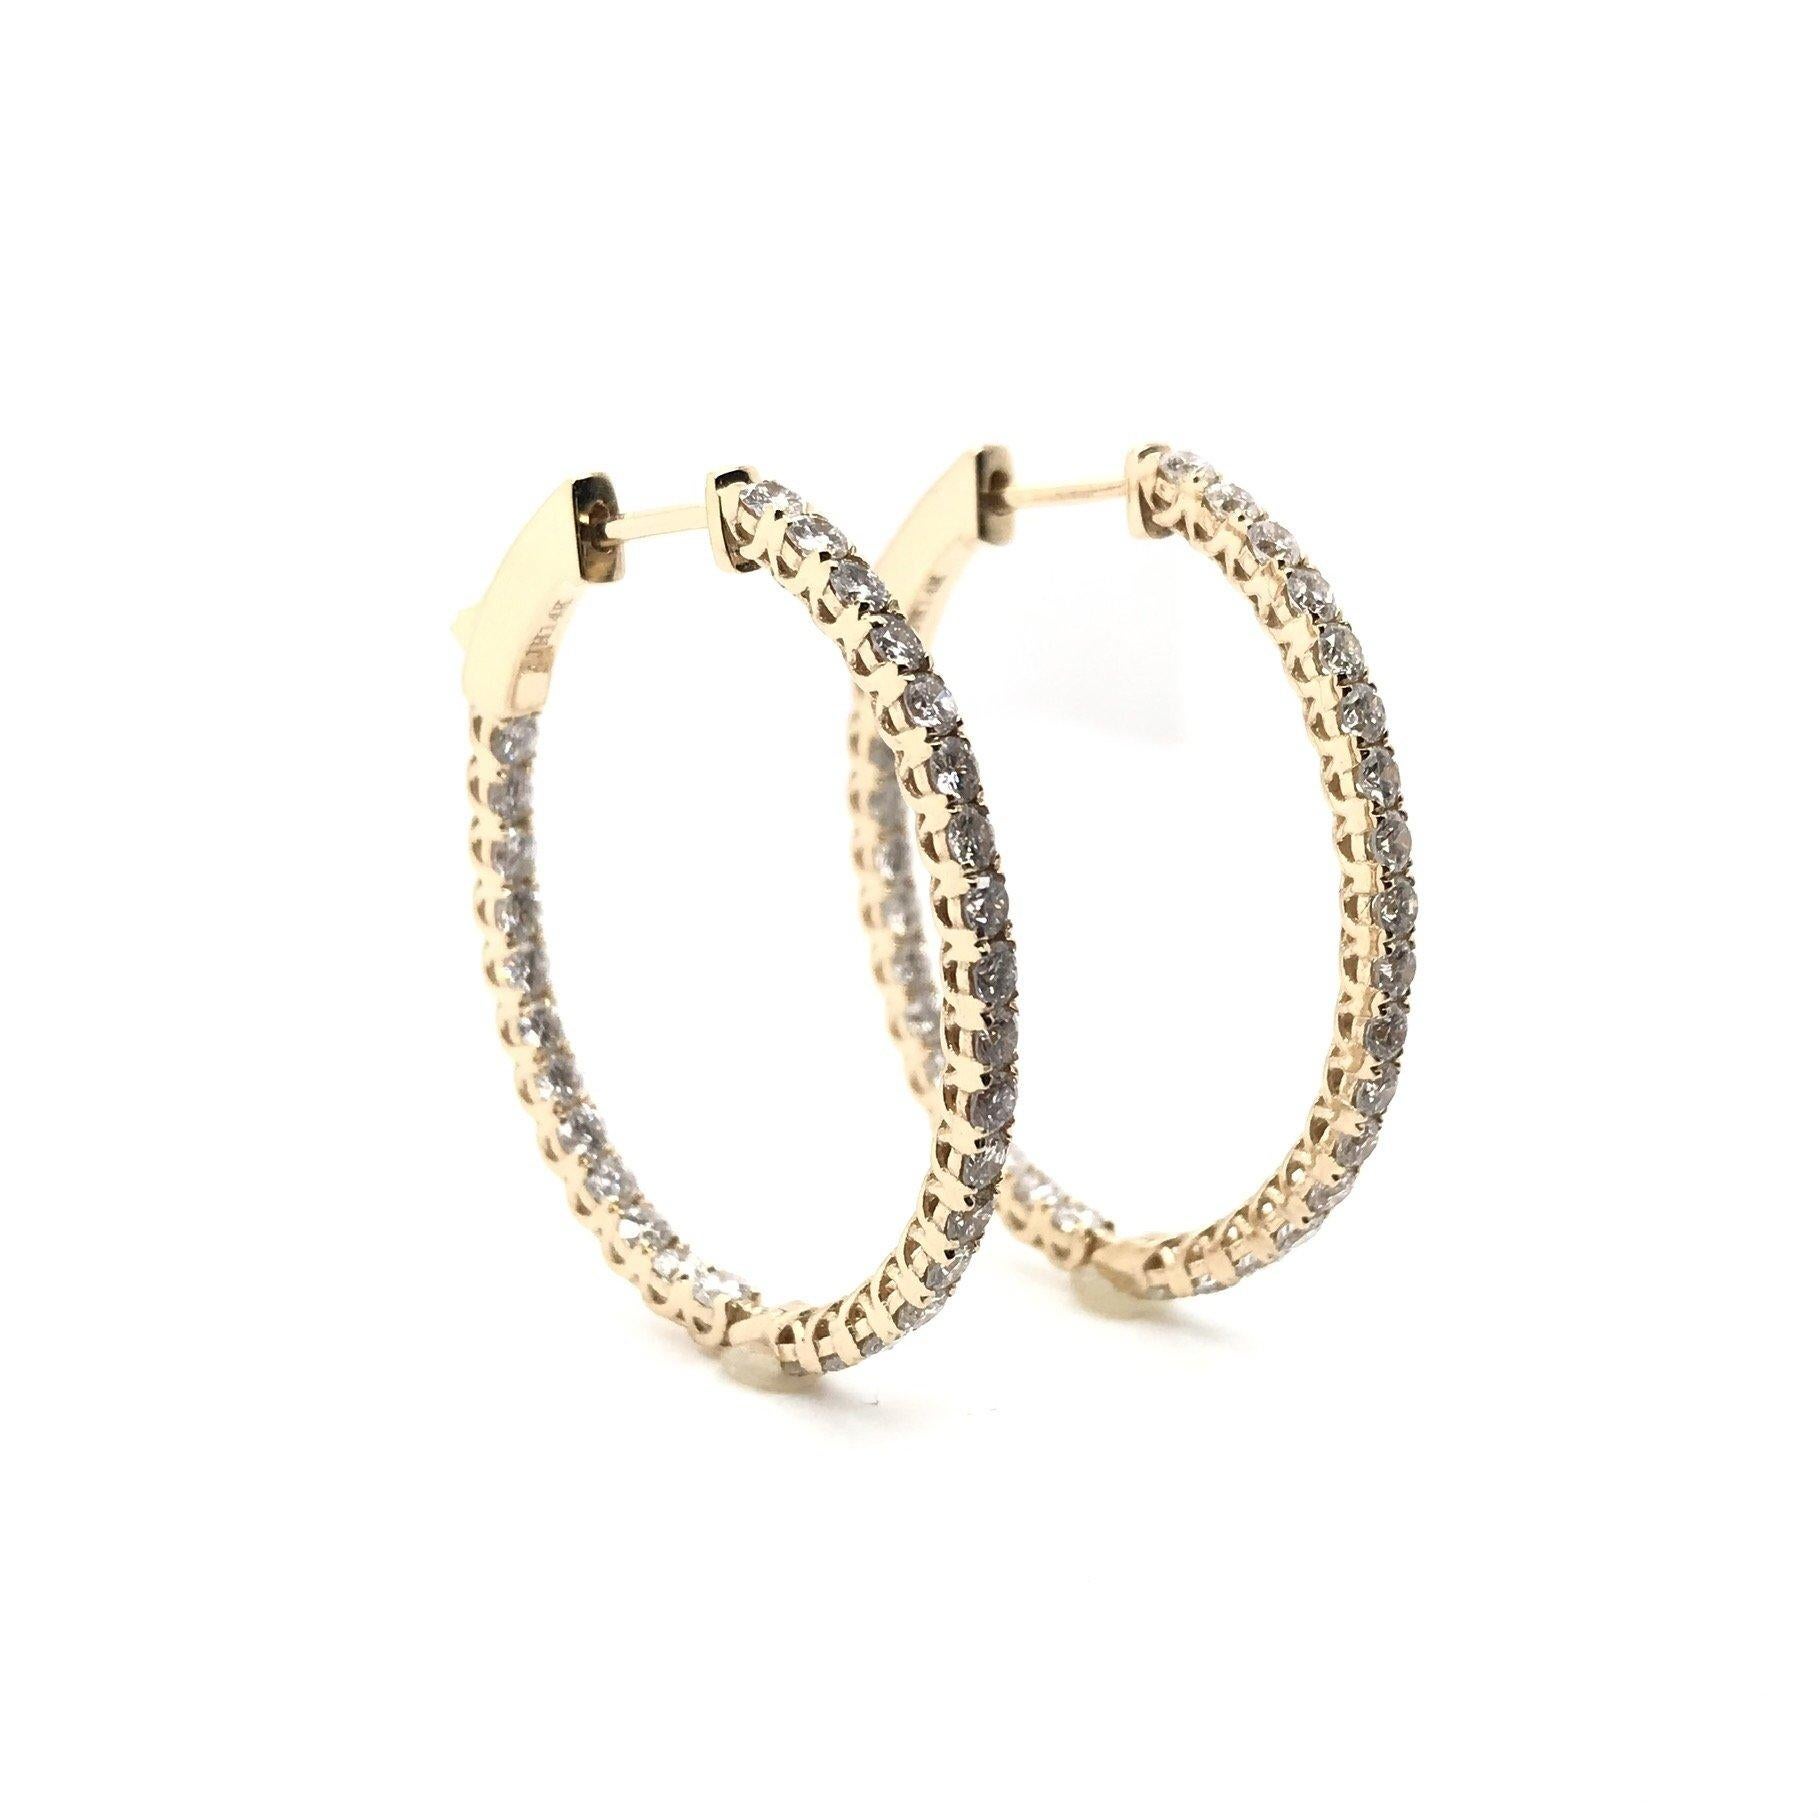 These stunning contemporary hoop earrings are new. Dazzling from every angle, these lovely diamond earrings feature approximately 2 full carats of diamonds; combined total weight. In and out style earrings feature diamonds set on the front facing